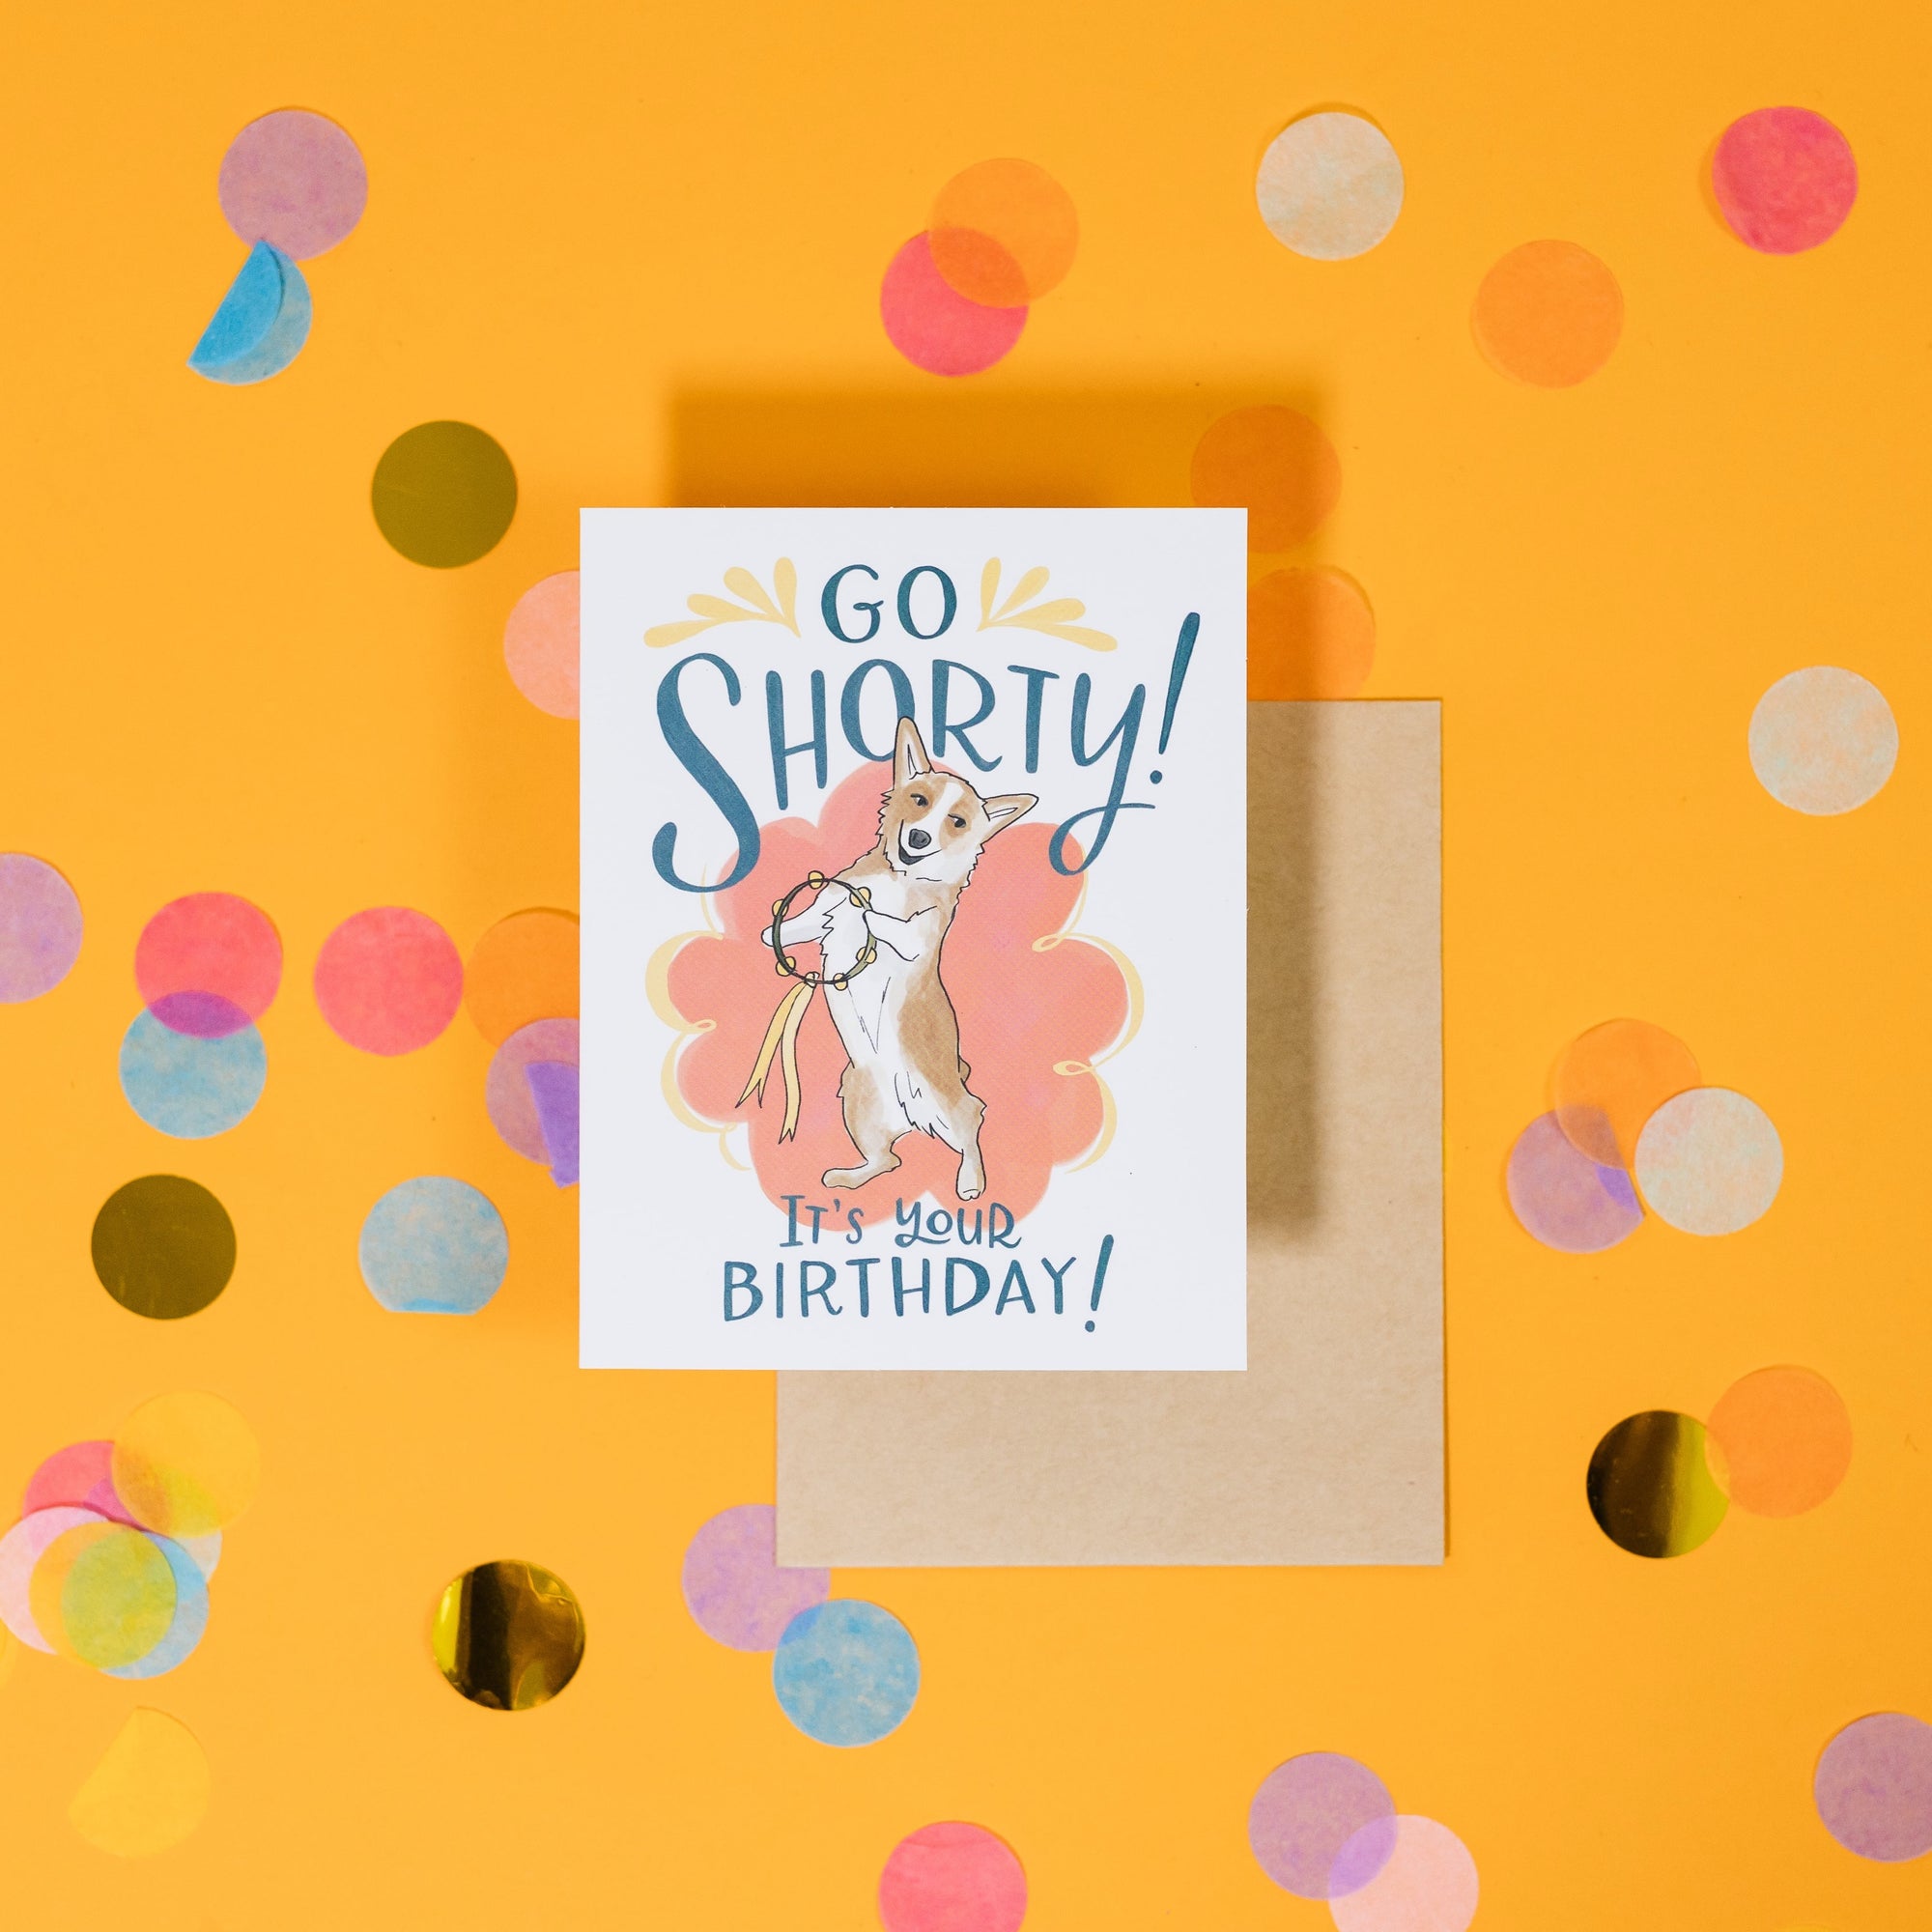 On a sunny mustard background is a greeting card and envelope with big, colorful confetti scattered around. The white greeting card has an illustration of a Corgi dog playing the tamborine on it and says "Go Shorty It's Your Birthday!" in handwritten blue lettering. The kraft envelope sits under the card. 